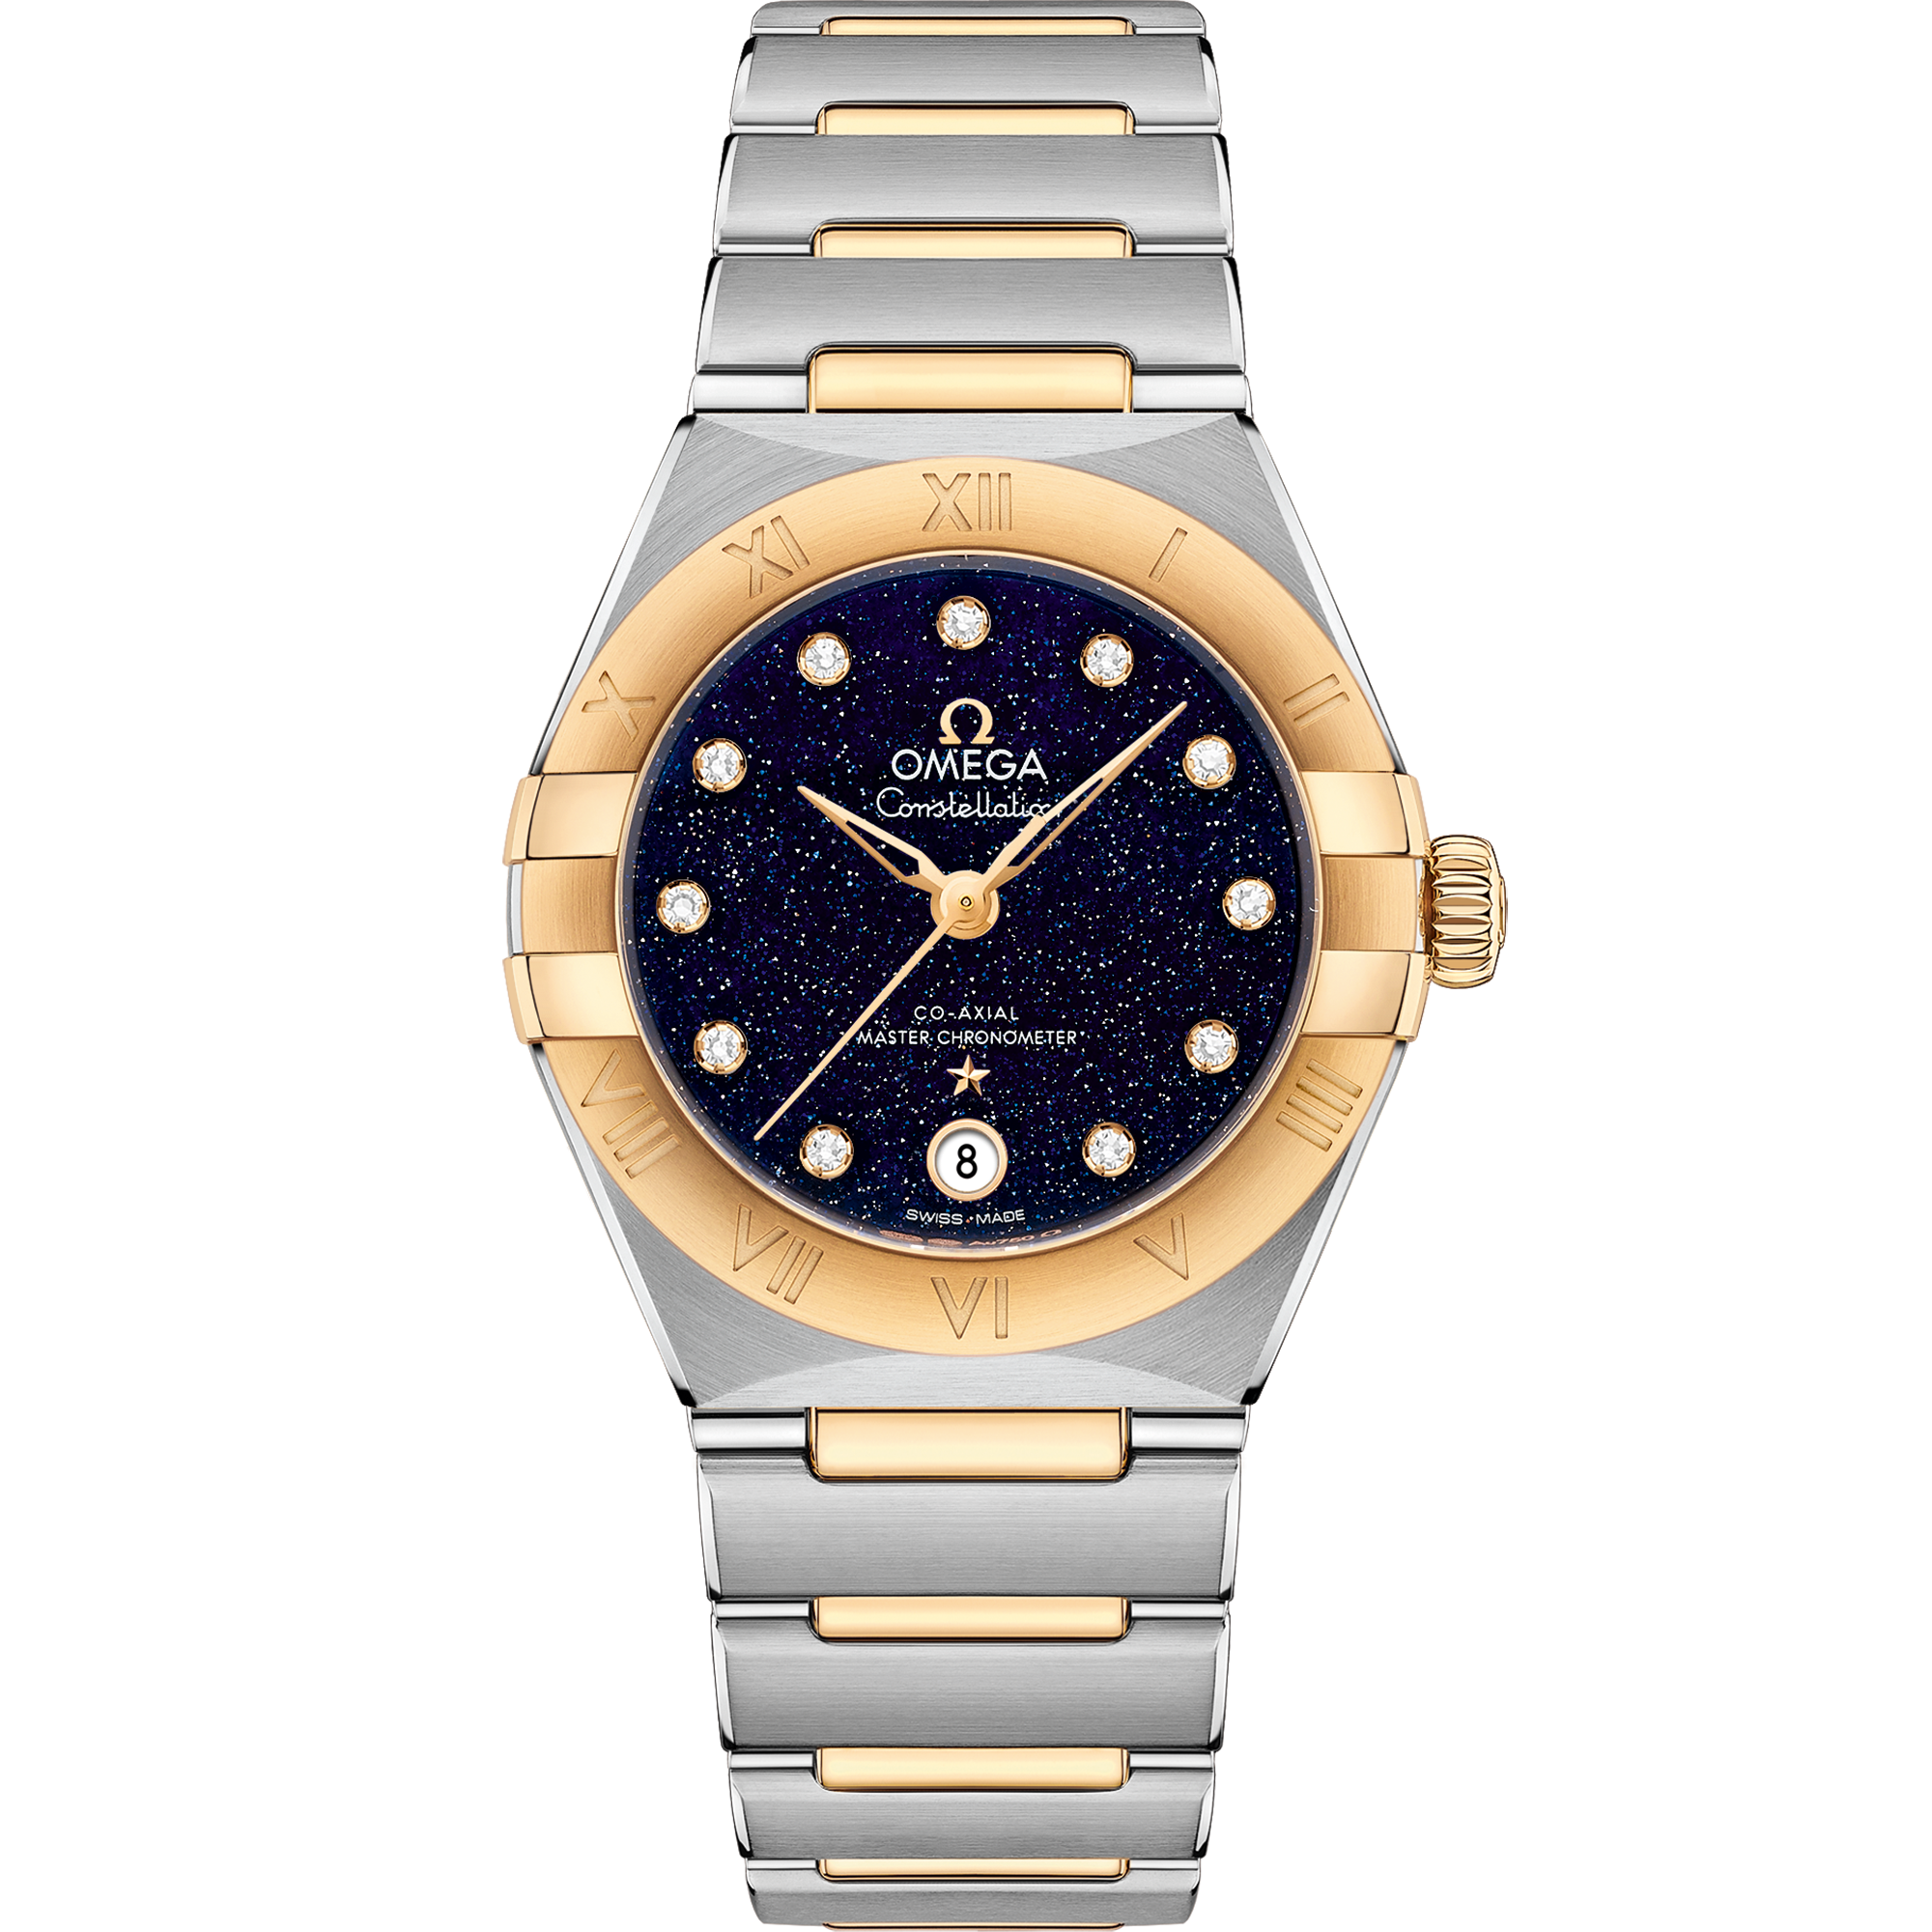 Constellation 29 mm, steel - yellow gold on steel - yellow gold - 131.20.29.20.53.001